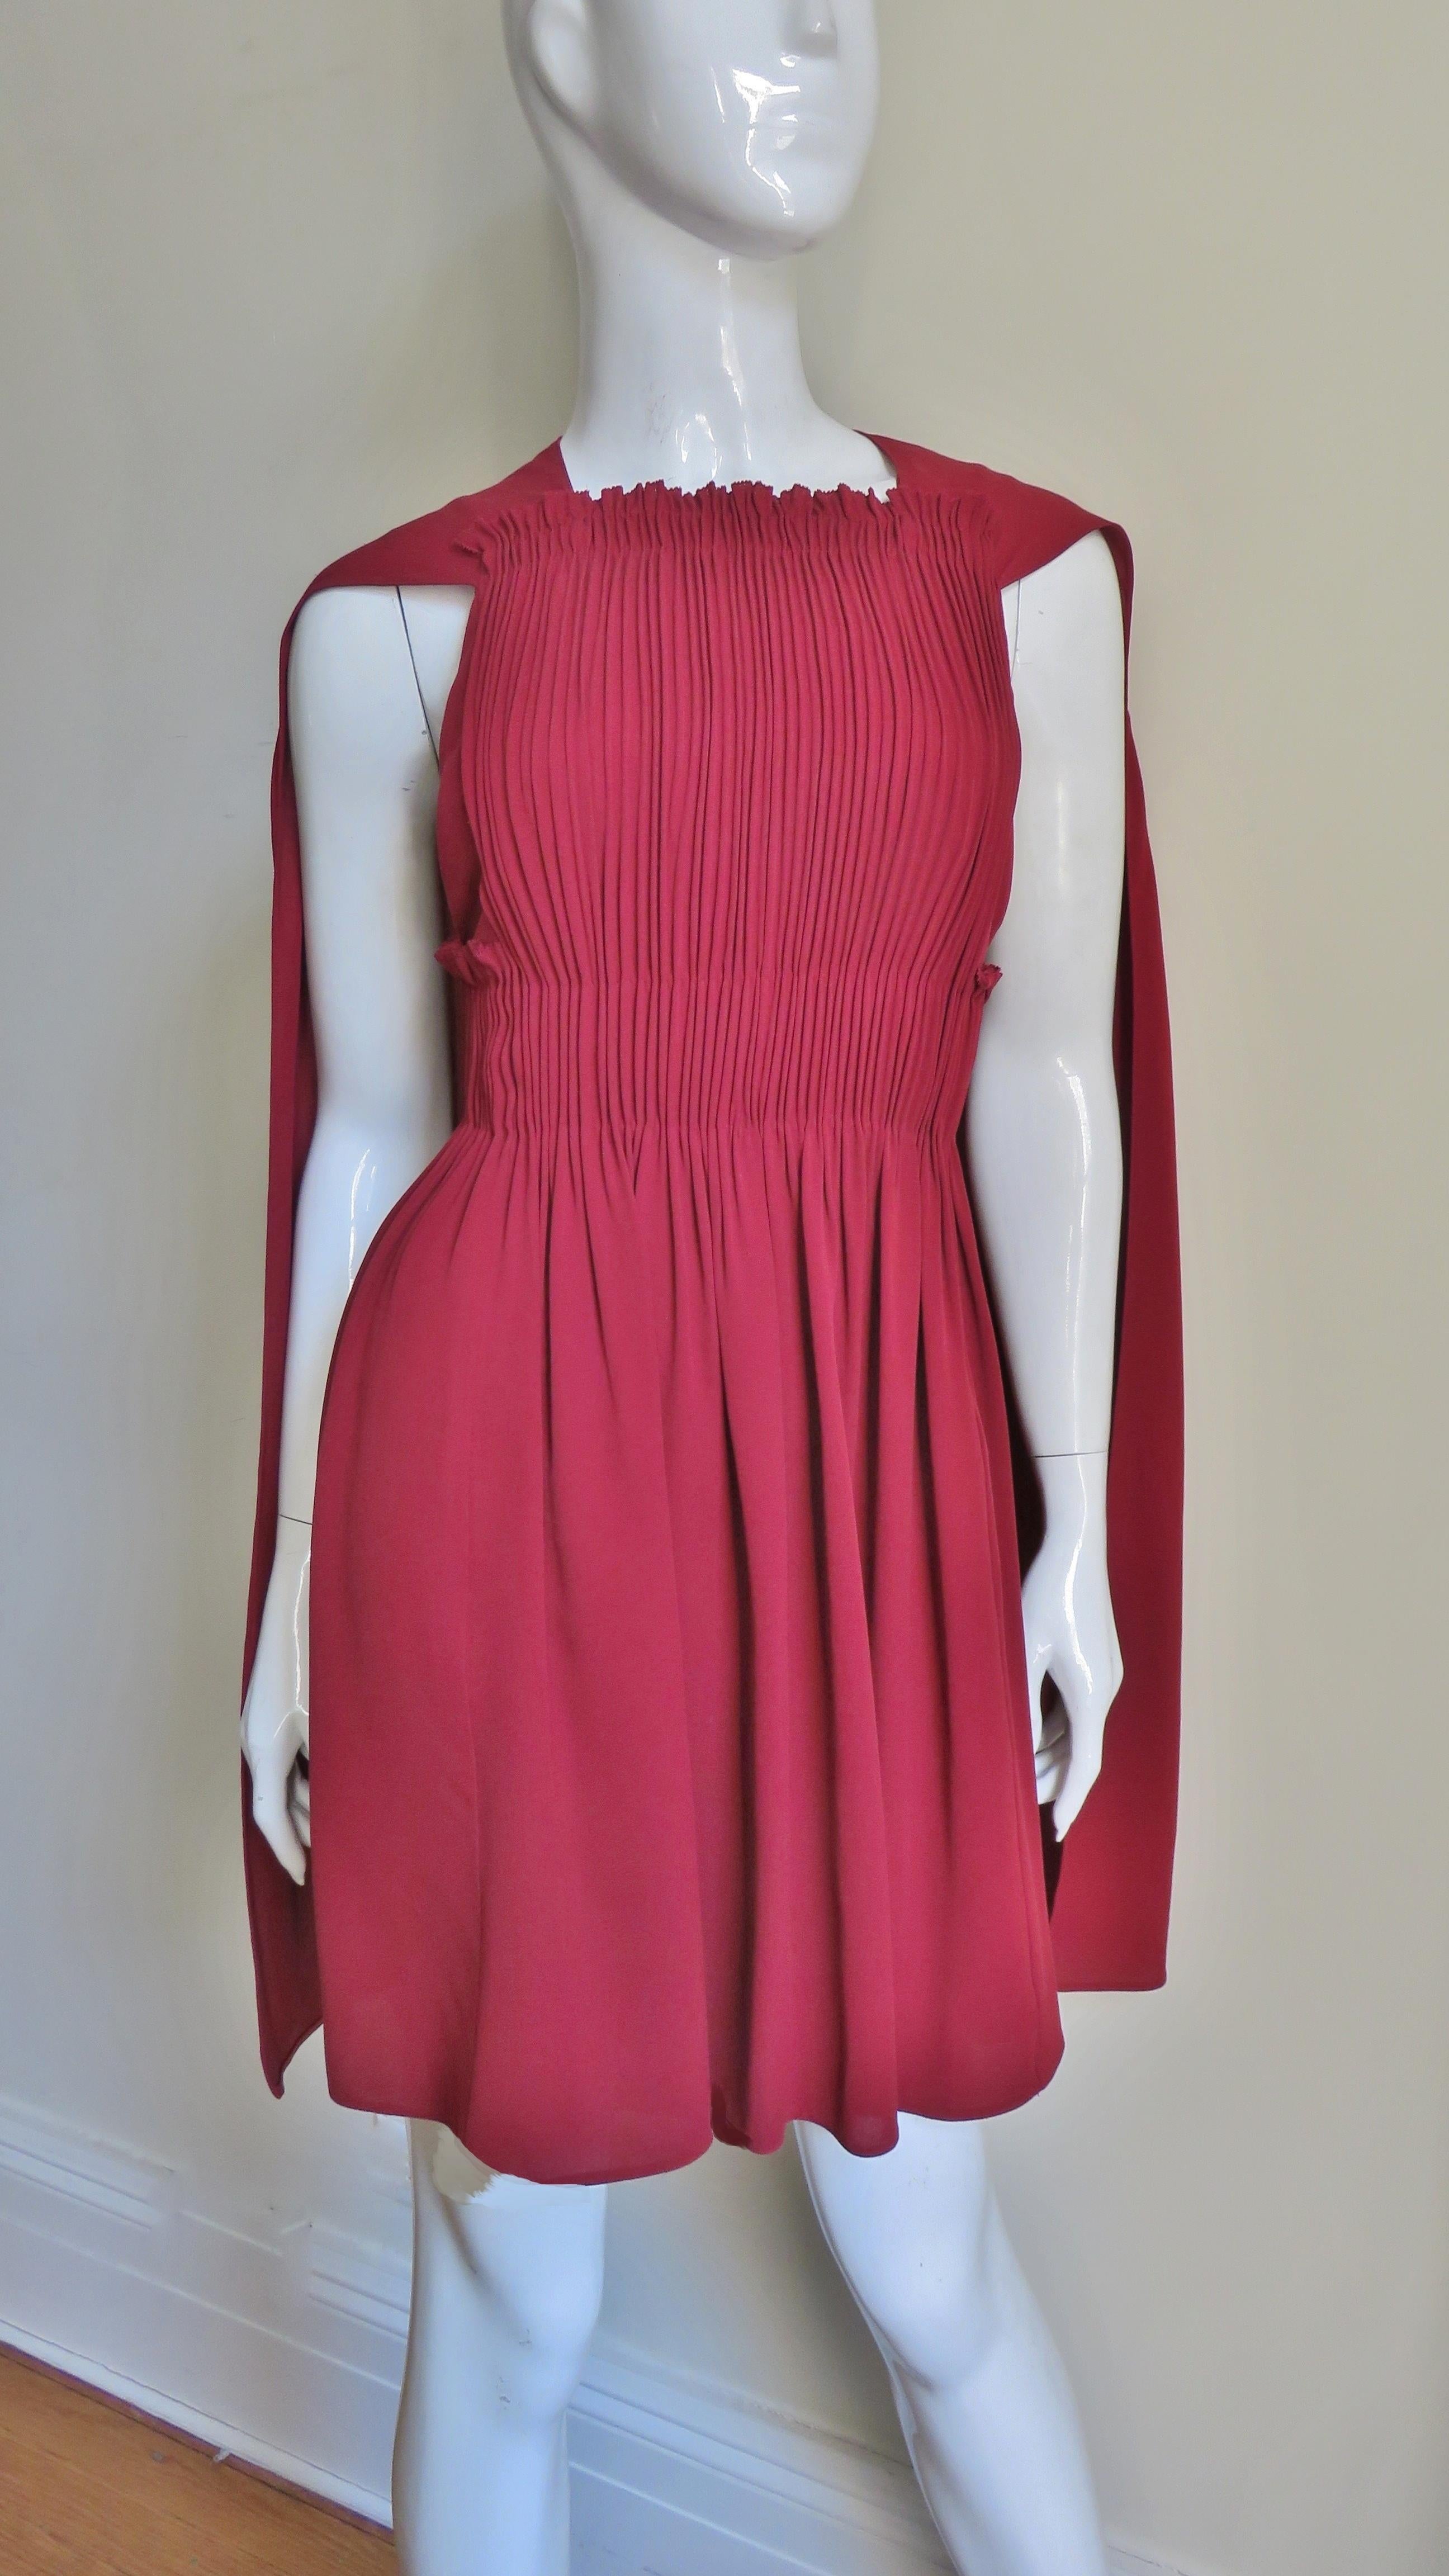 An incredible deep red dress with cape from Valentino. It has a vertically ruched front bodice (with straps in the back) that releases at the high waist into a full skirt.The underarms are deeply cut and a cape emanates from the shoulders. The